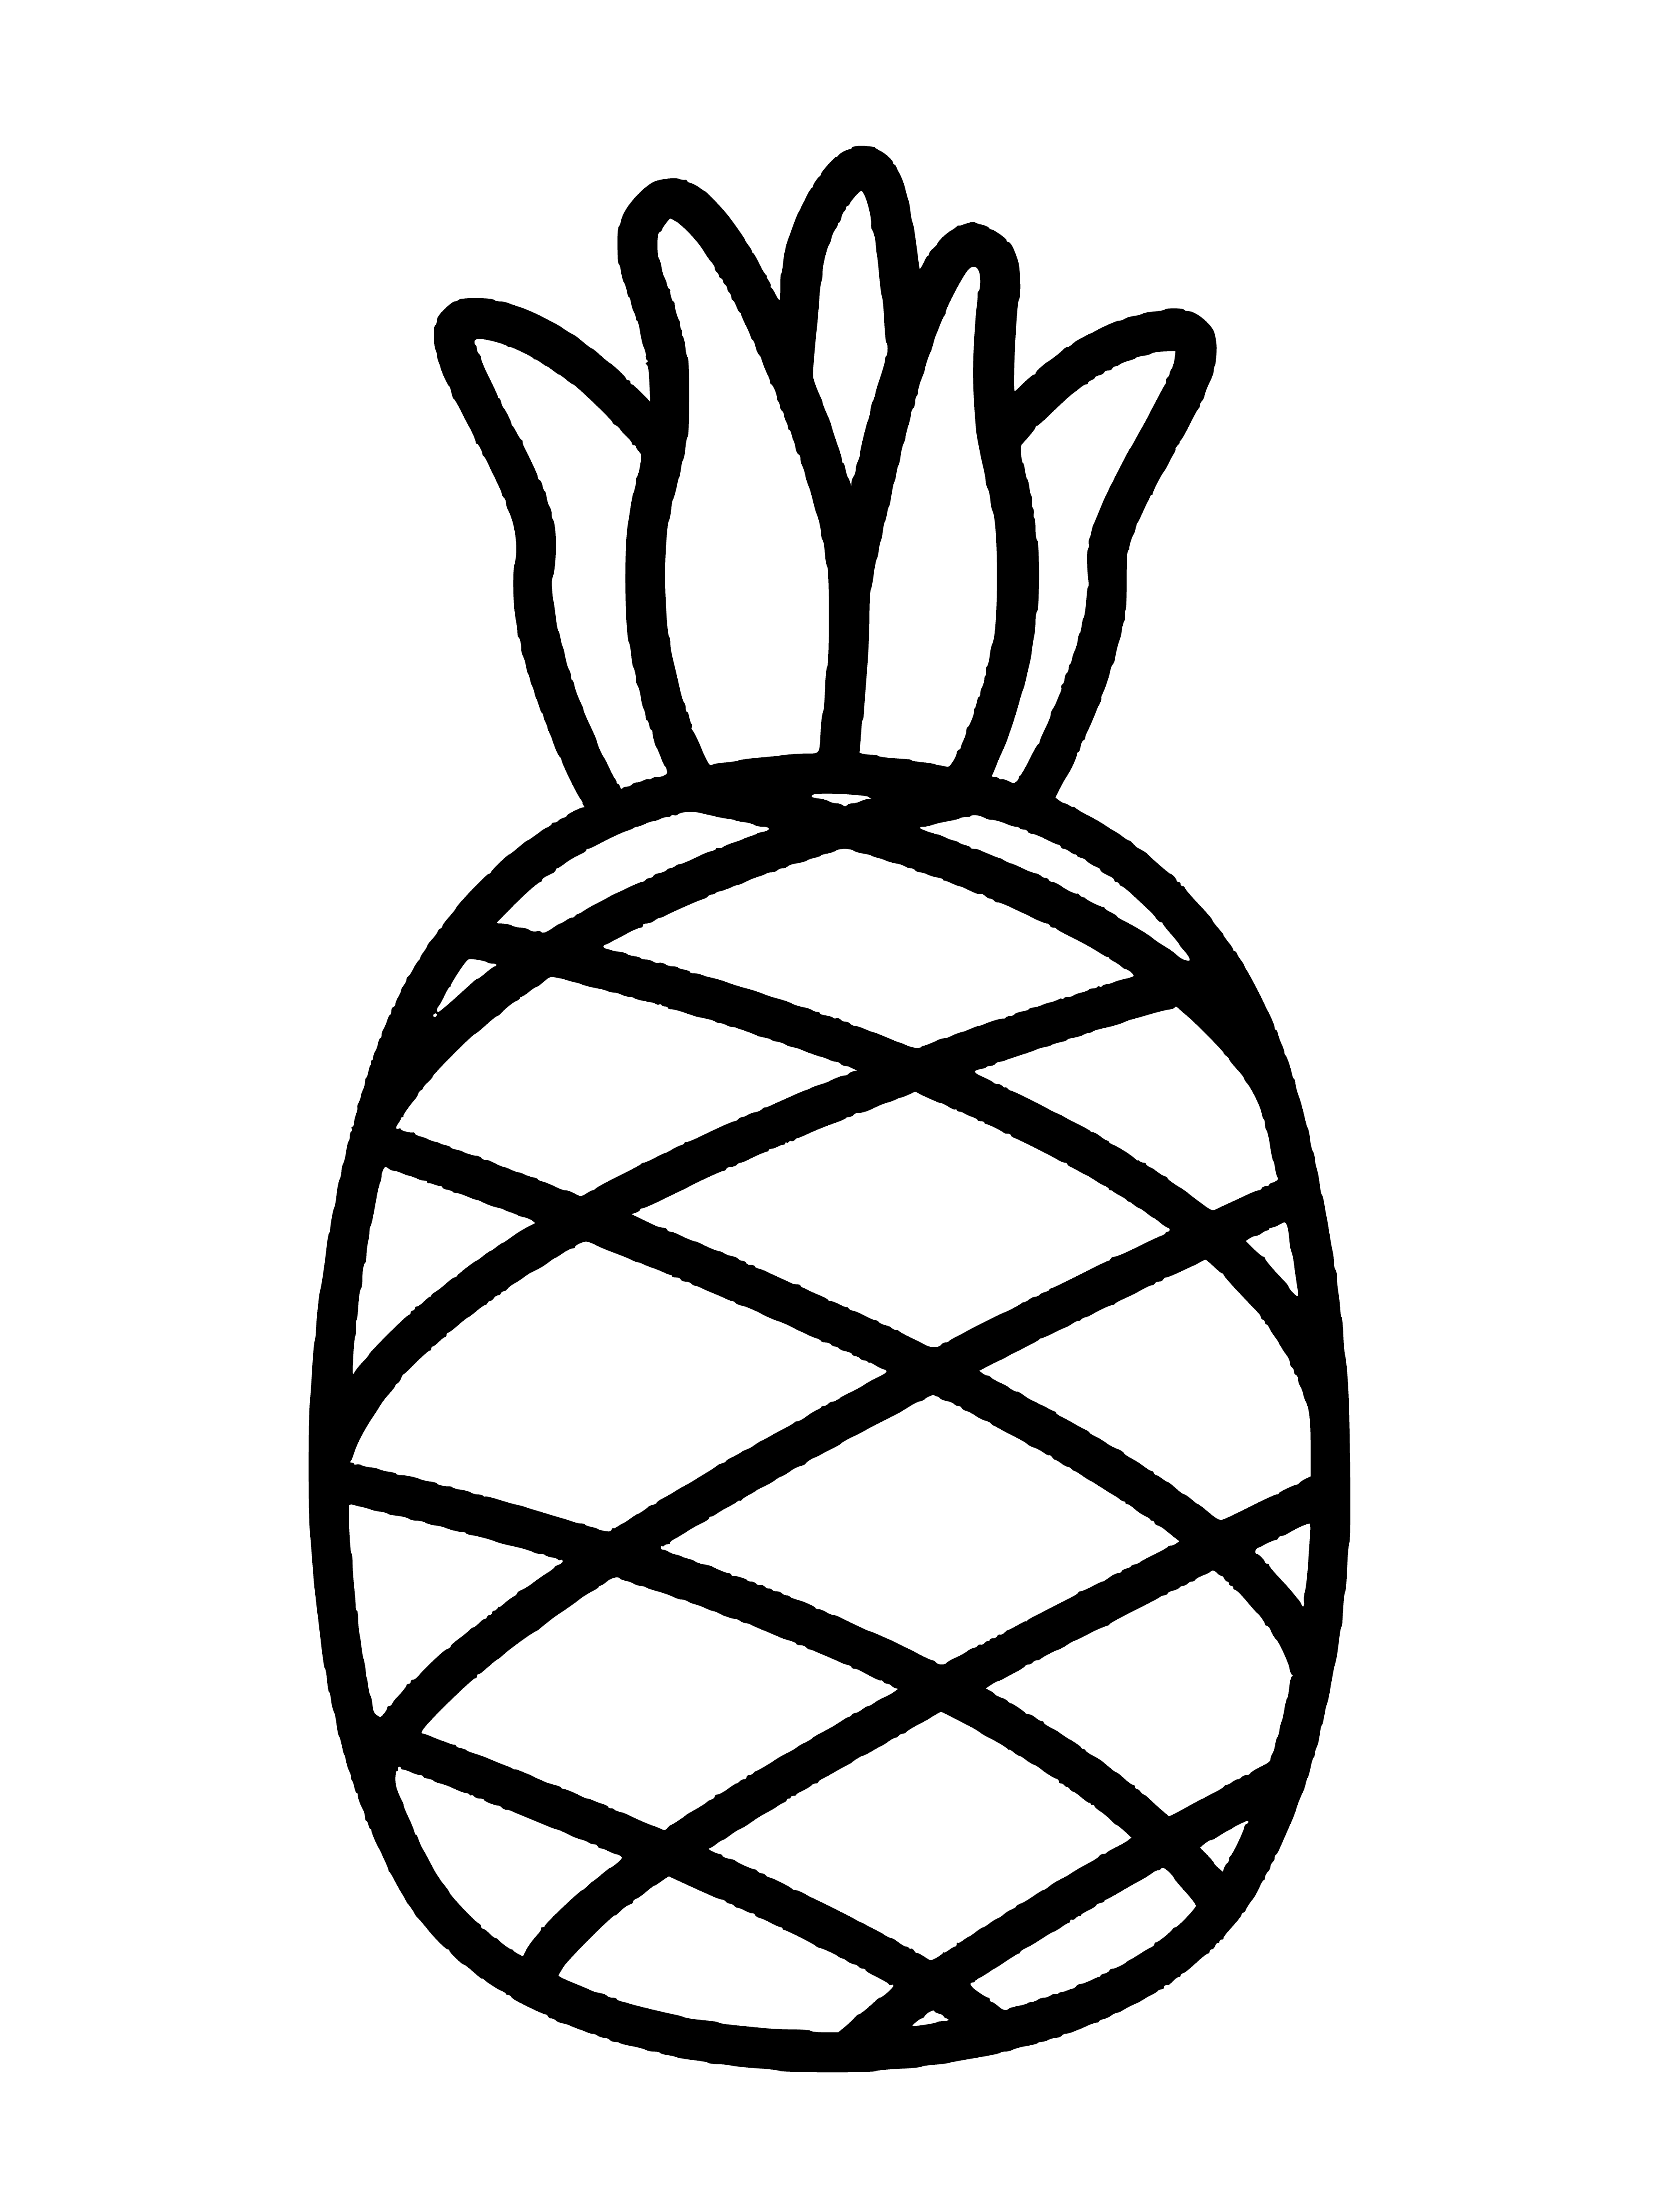 coloring page: Pineapple cut on a cutting board into quarters and slices. Slices lay on board.